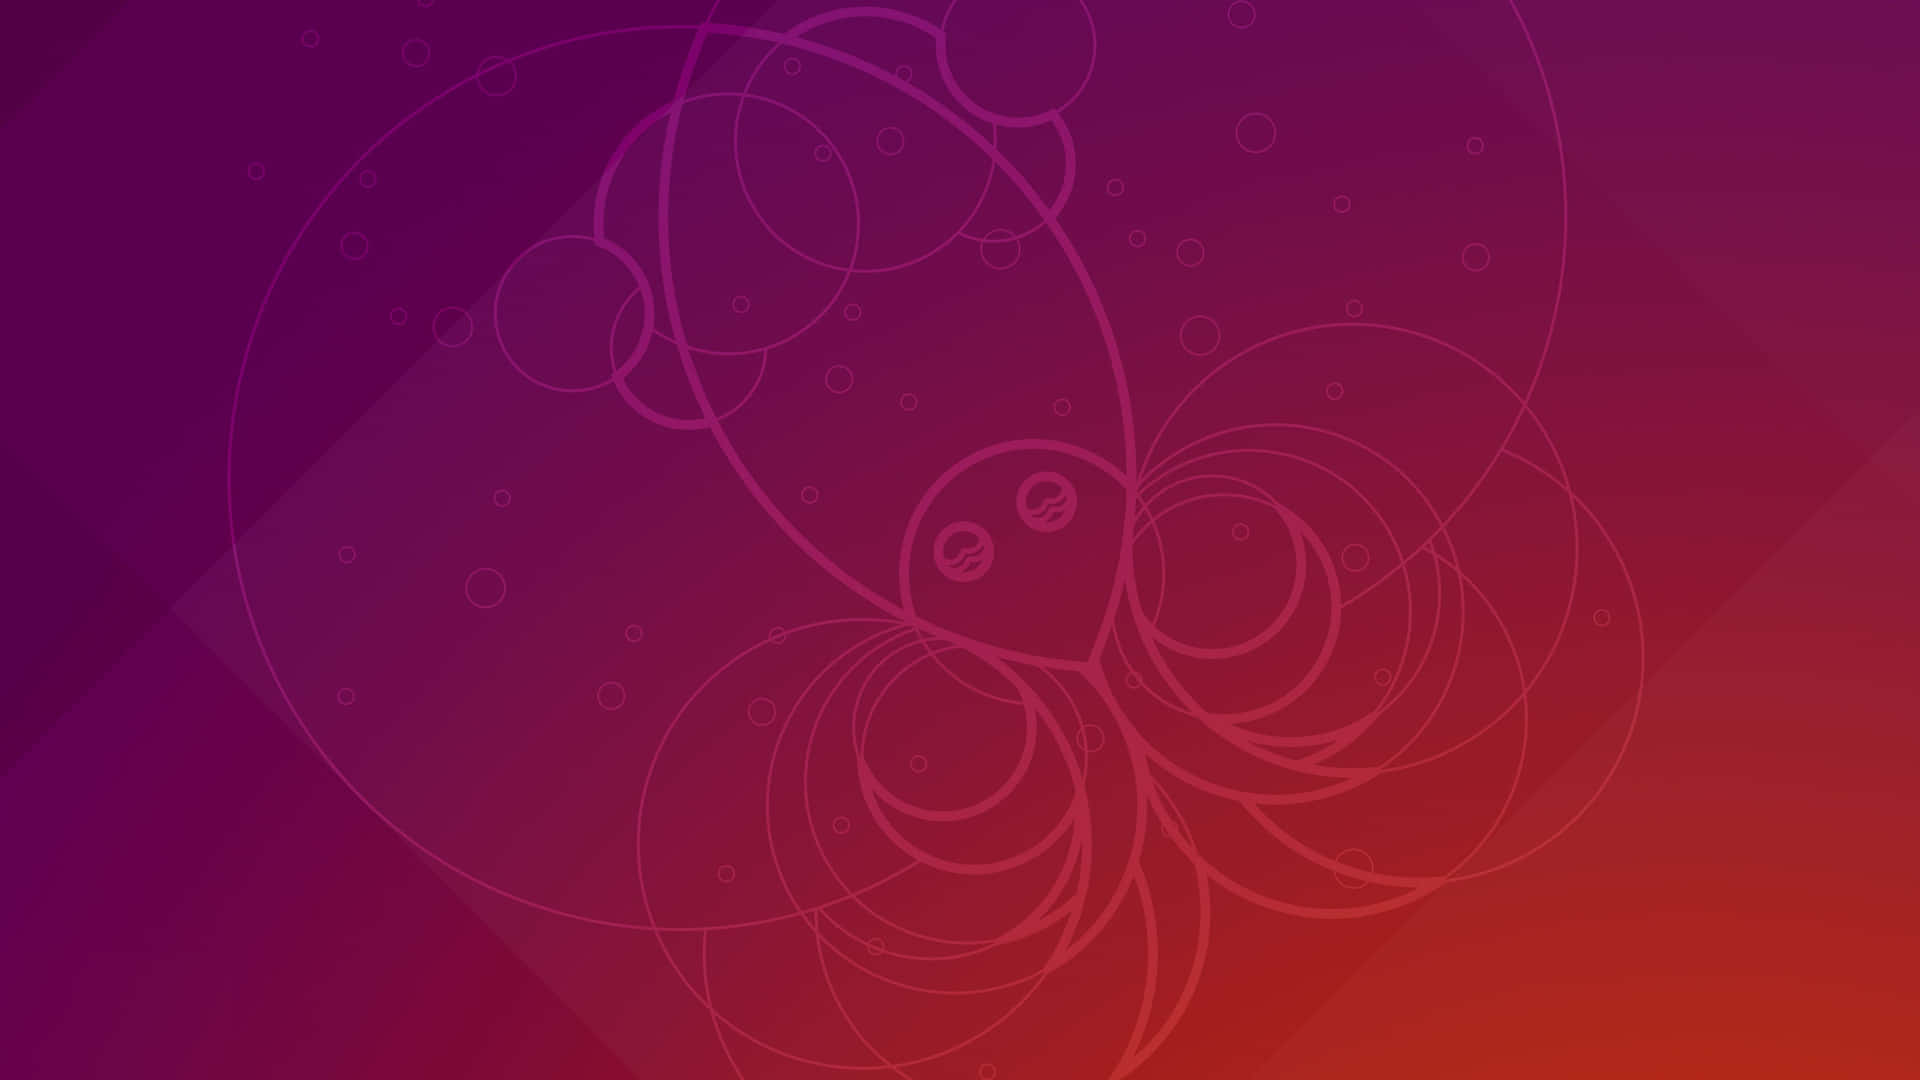 A Purple Background With An Octopus On It Wallpaper